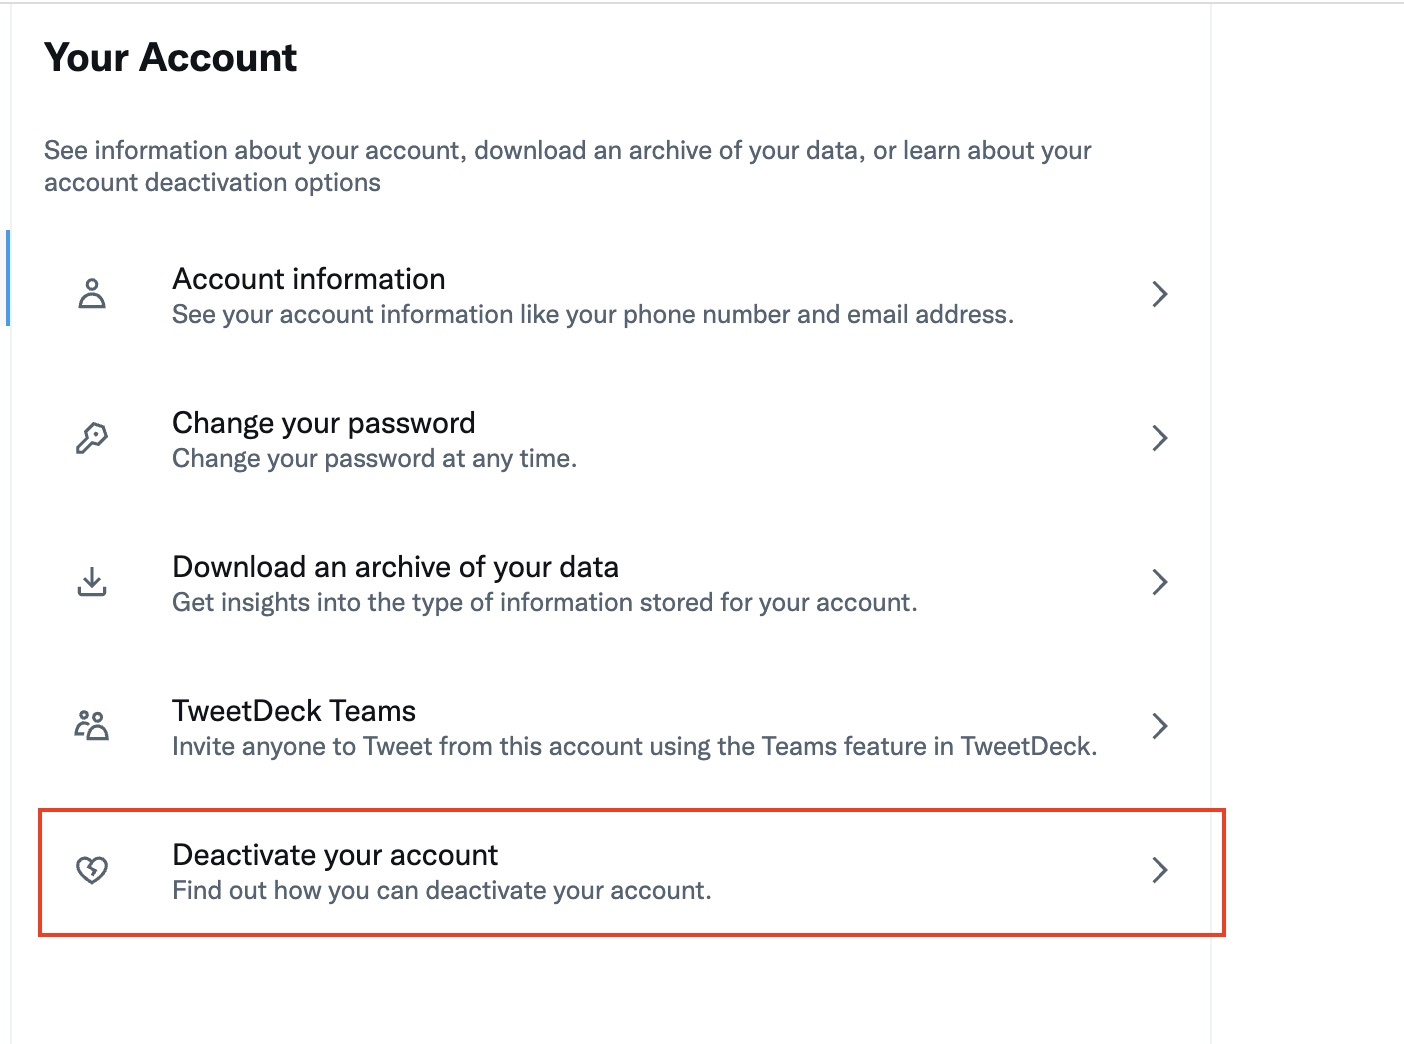 The step-by-step guide to deactivating your Twitter account